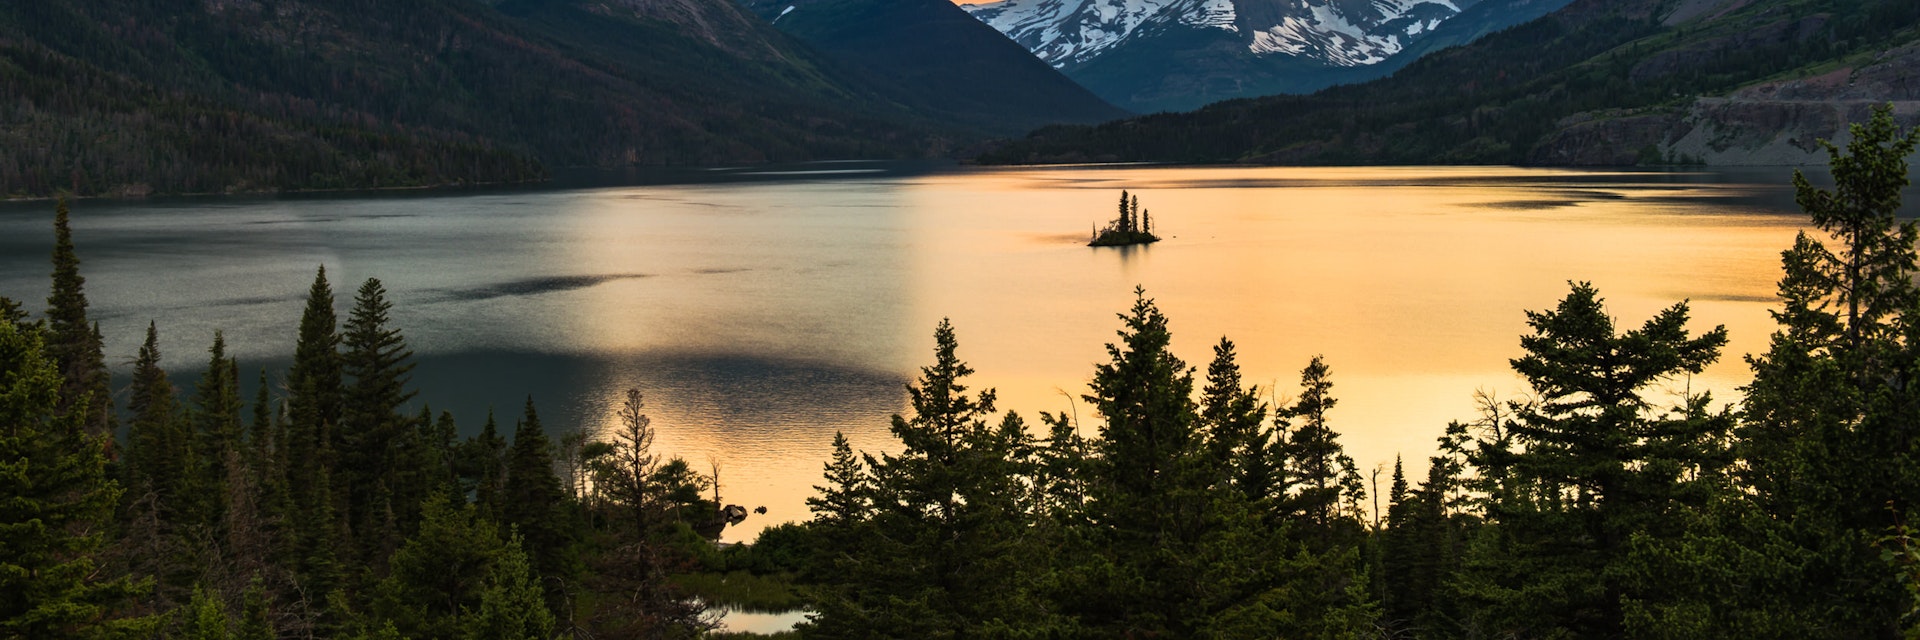 Beautiful colorful sunset over St. Mary Lake and wild goose island in Glacier national park; Shutterstock ID 306129650; Your name (First / Last): Emma Sparks; GL account no.: 65050; Netsuite department name: Online Editorial; Full Product or Project name including edition: Best_in_the_US_POIs